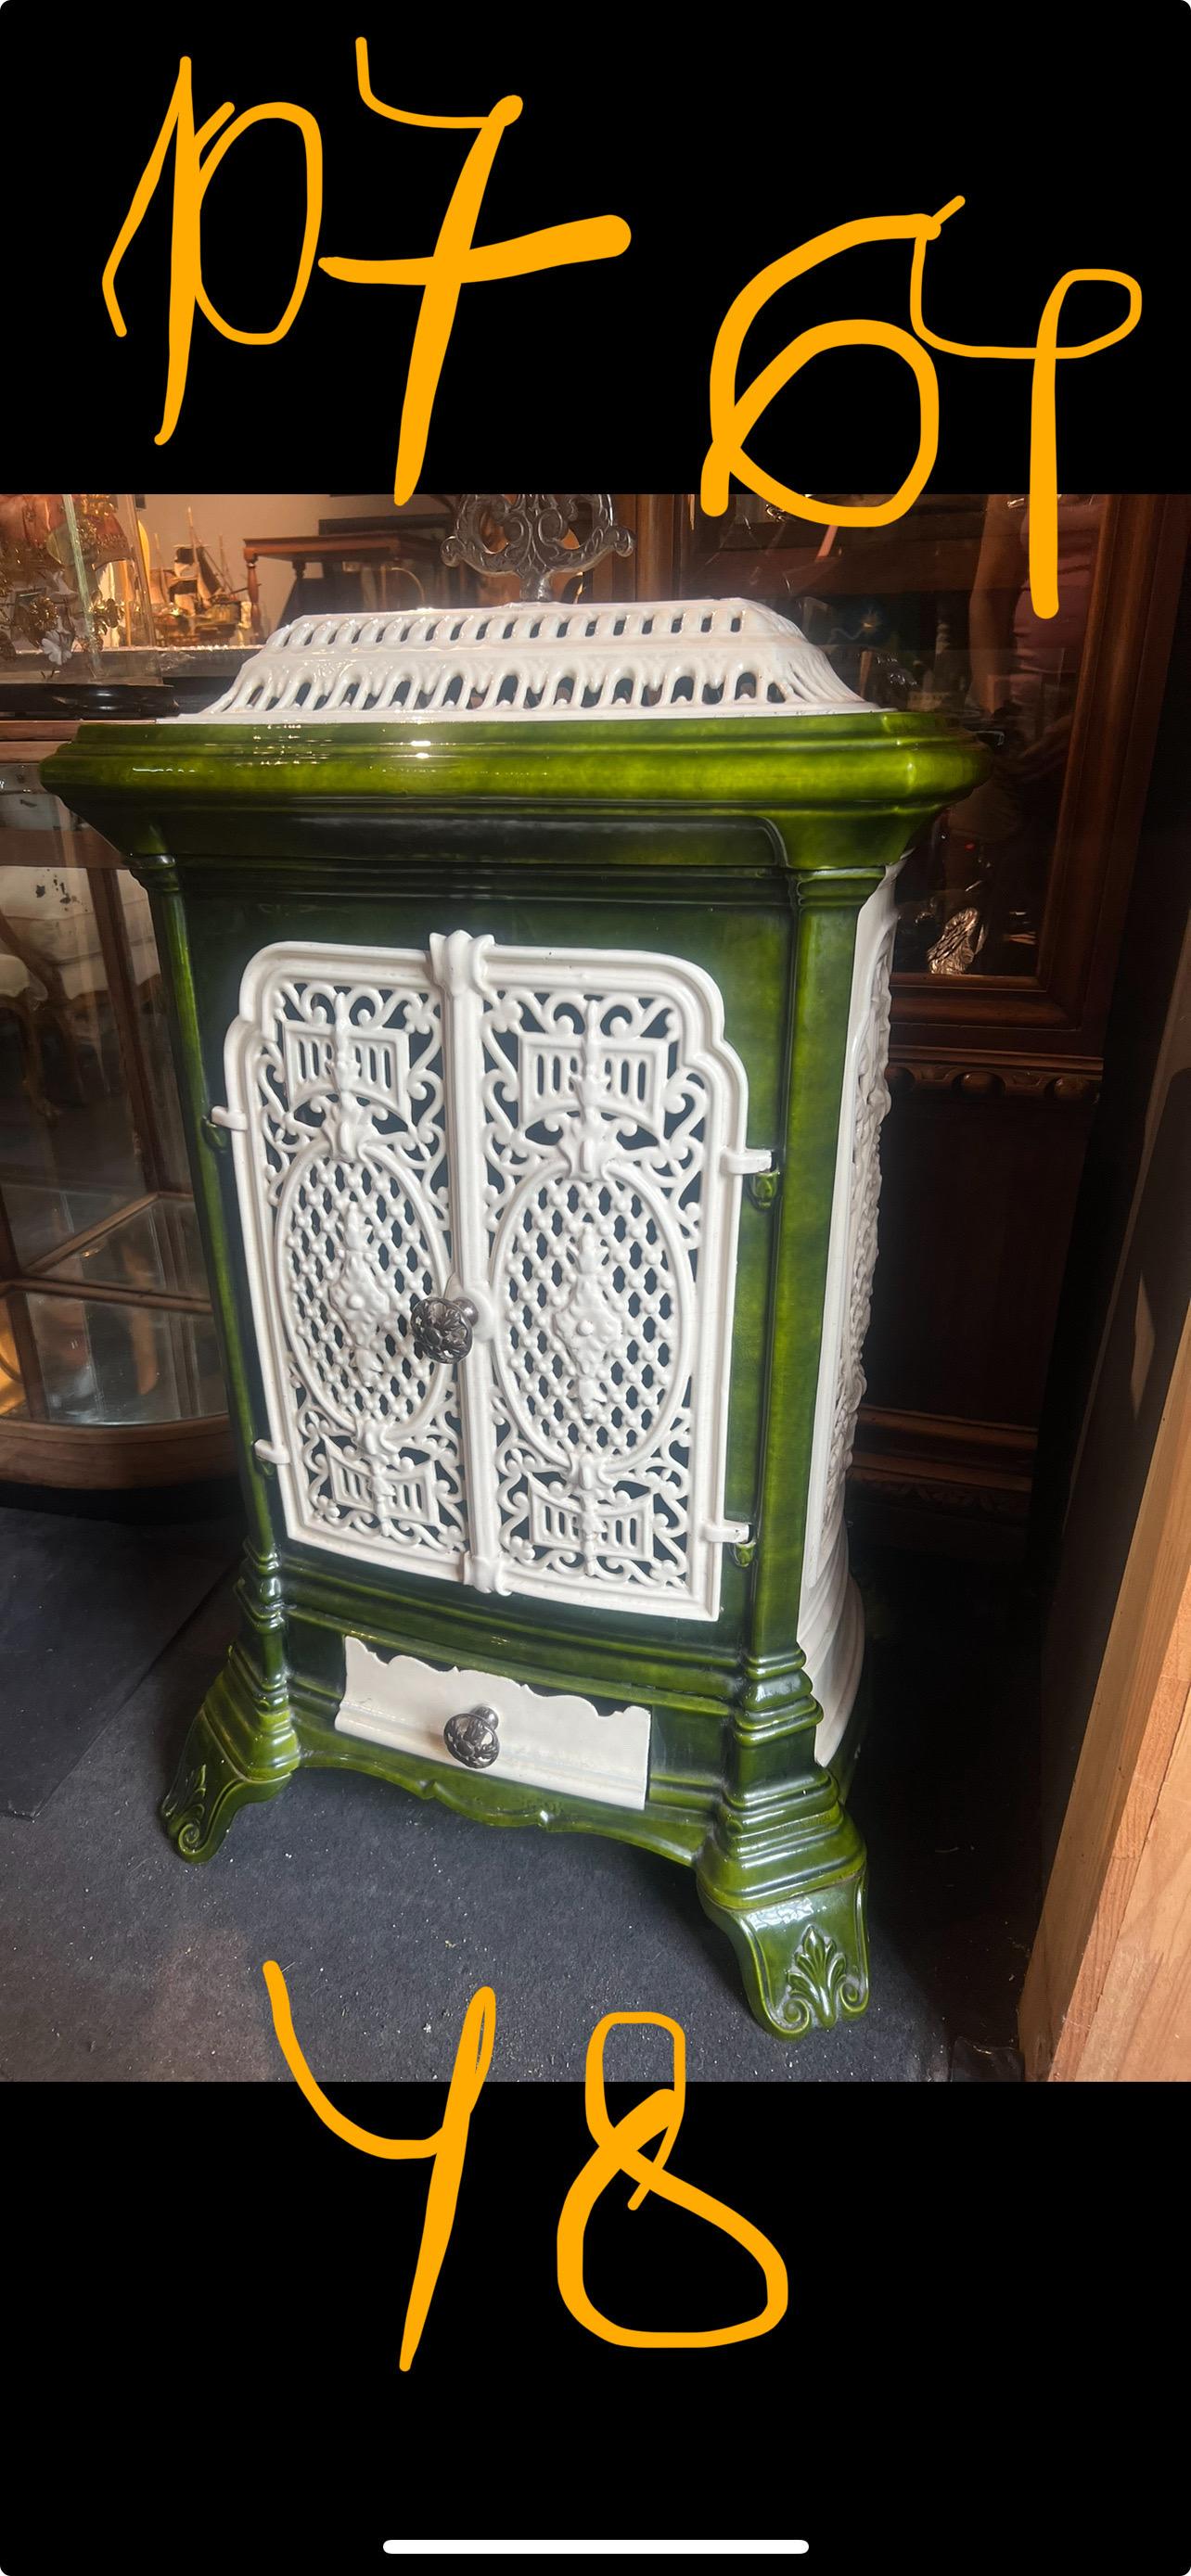 20th Century green and white enamelled cast iron radiator cover with opening access doors to the front and top with installed fully working stove inside.
Very good condition and no restorations.
France, circa 1920